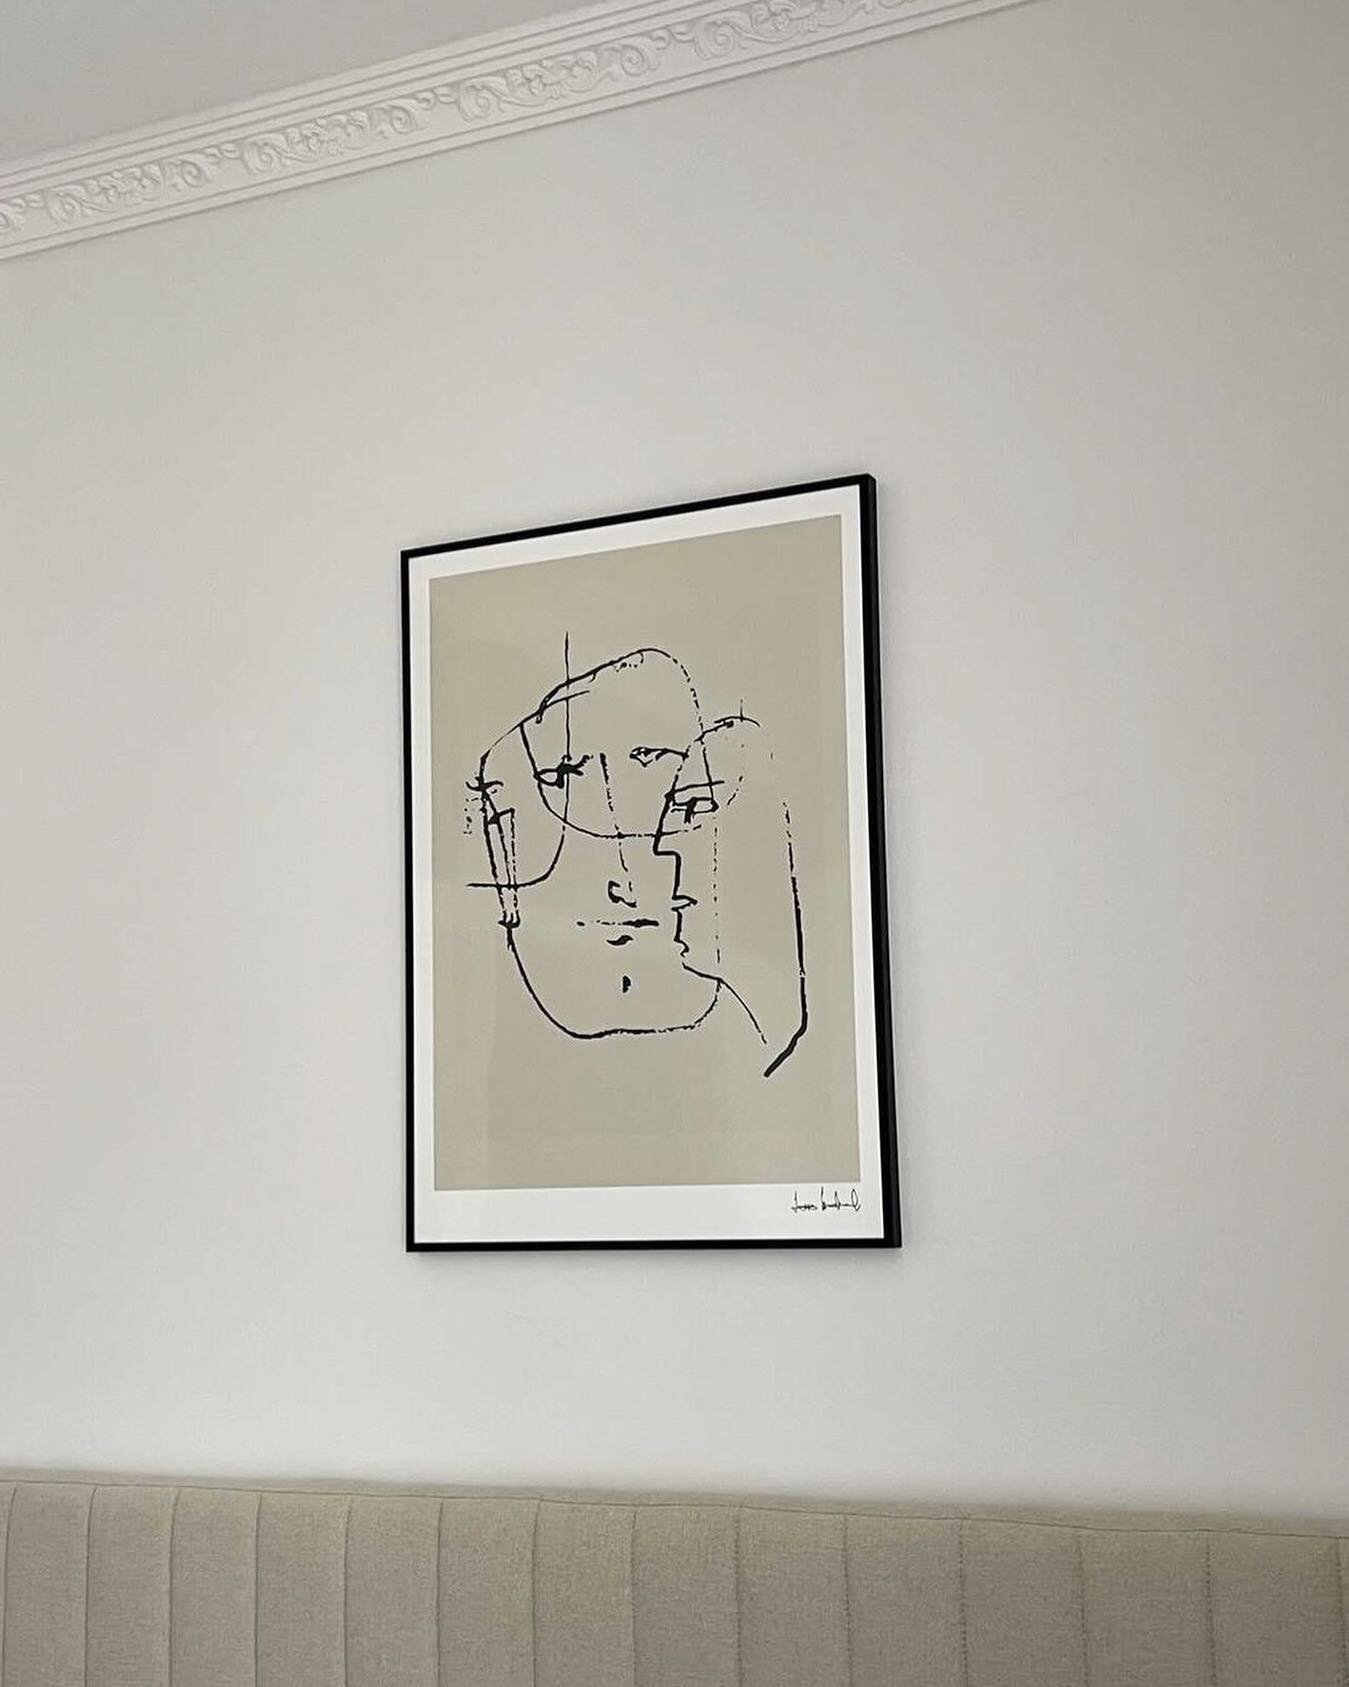 The Look - by Lars Iwdal.
Sold exclusively via The Art Club.
Seen at @fredrikapersson stylish home. 

#theartclub #scandinavianlivingroom #interior #design #art #artprints #abstractart #beige #nordicliving #simpledecor #minimalistic